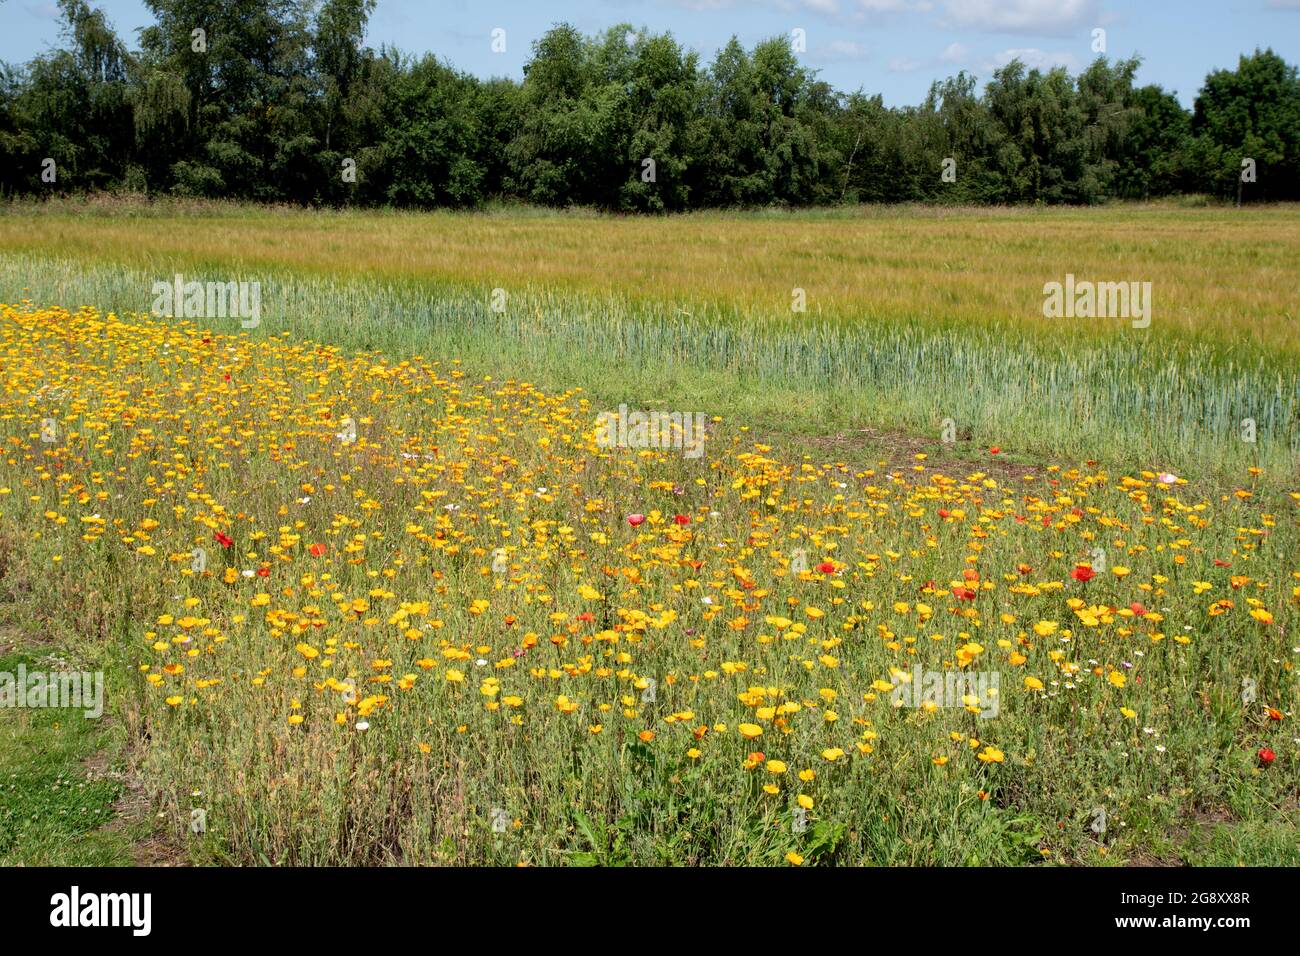 Meadow planting at Breezy Knees Gardens Stock Photo